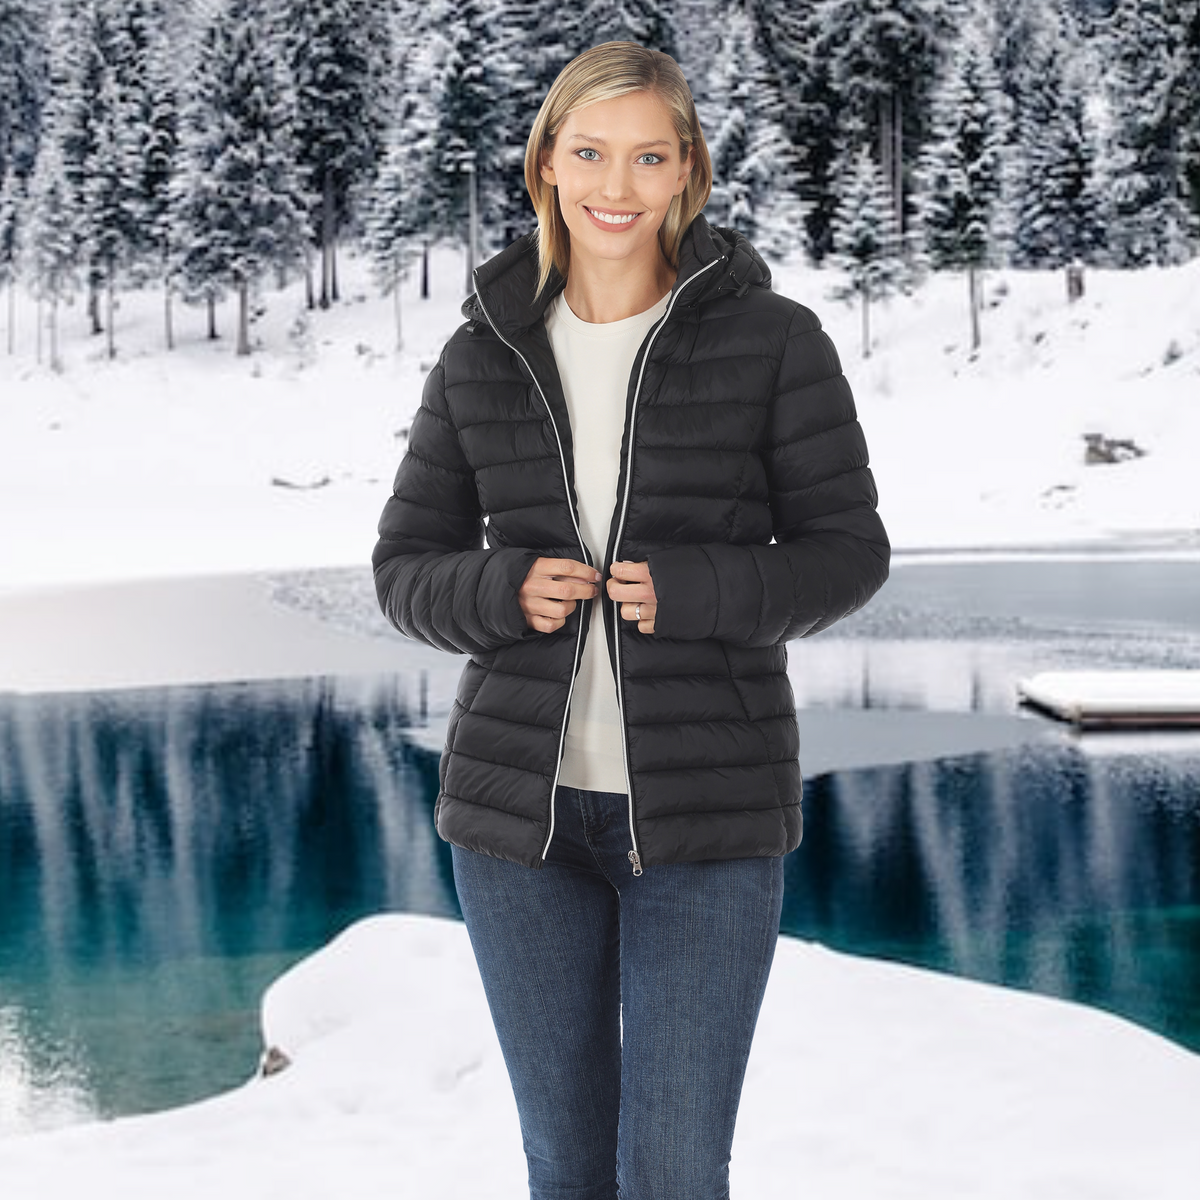 Womens Juniors Black Puffer Jacket with Removable Hood and Pockets